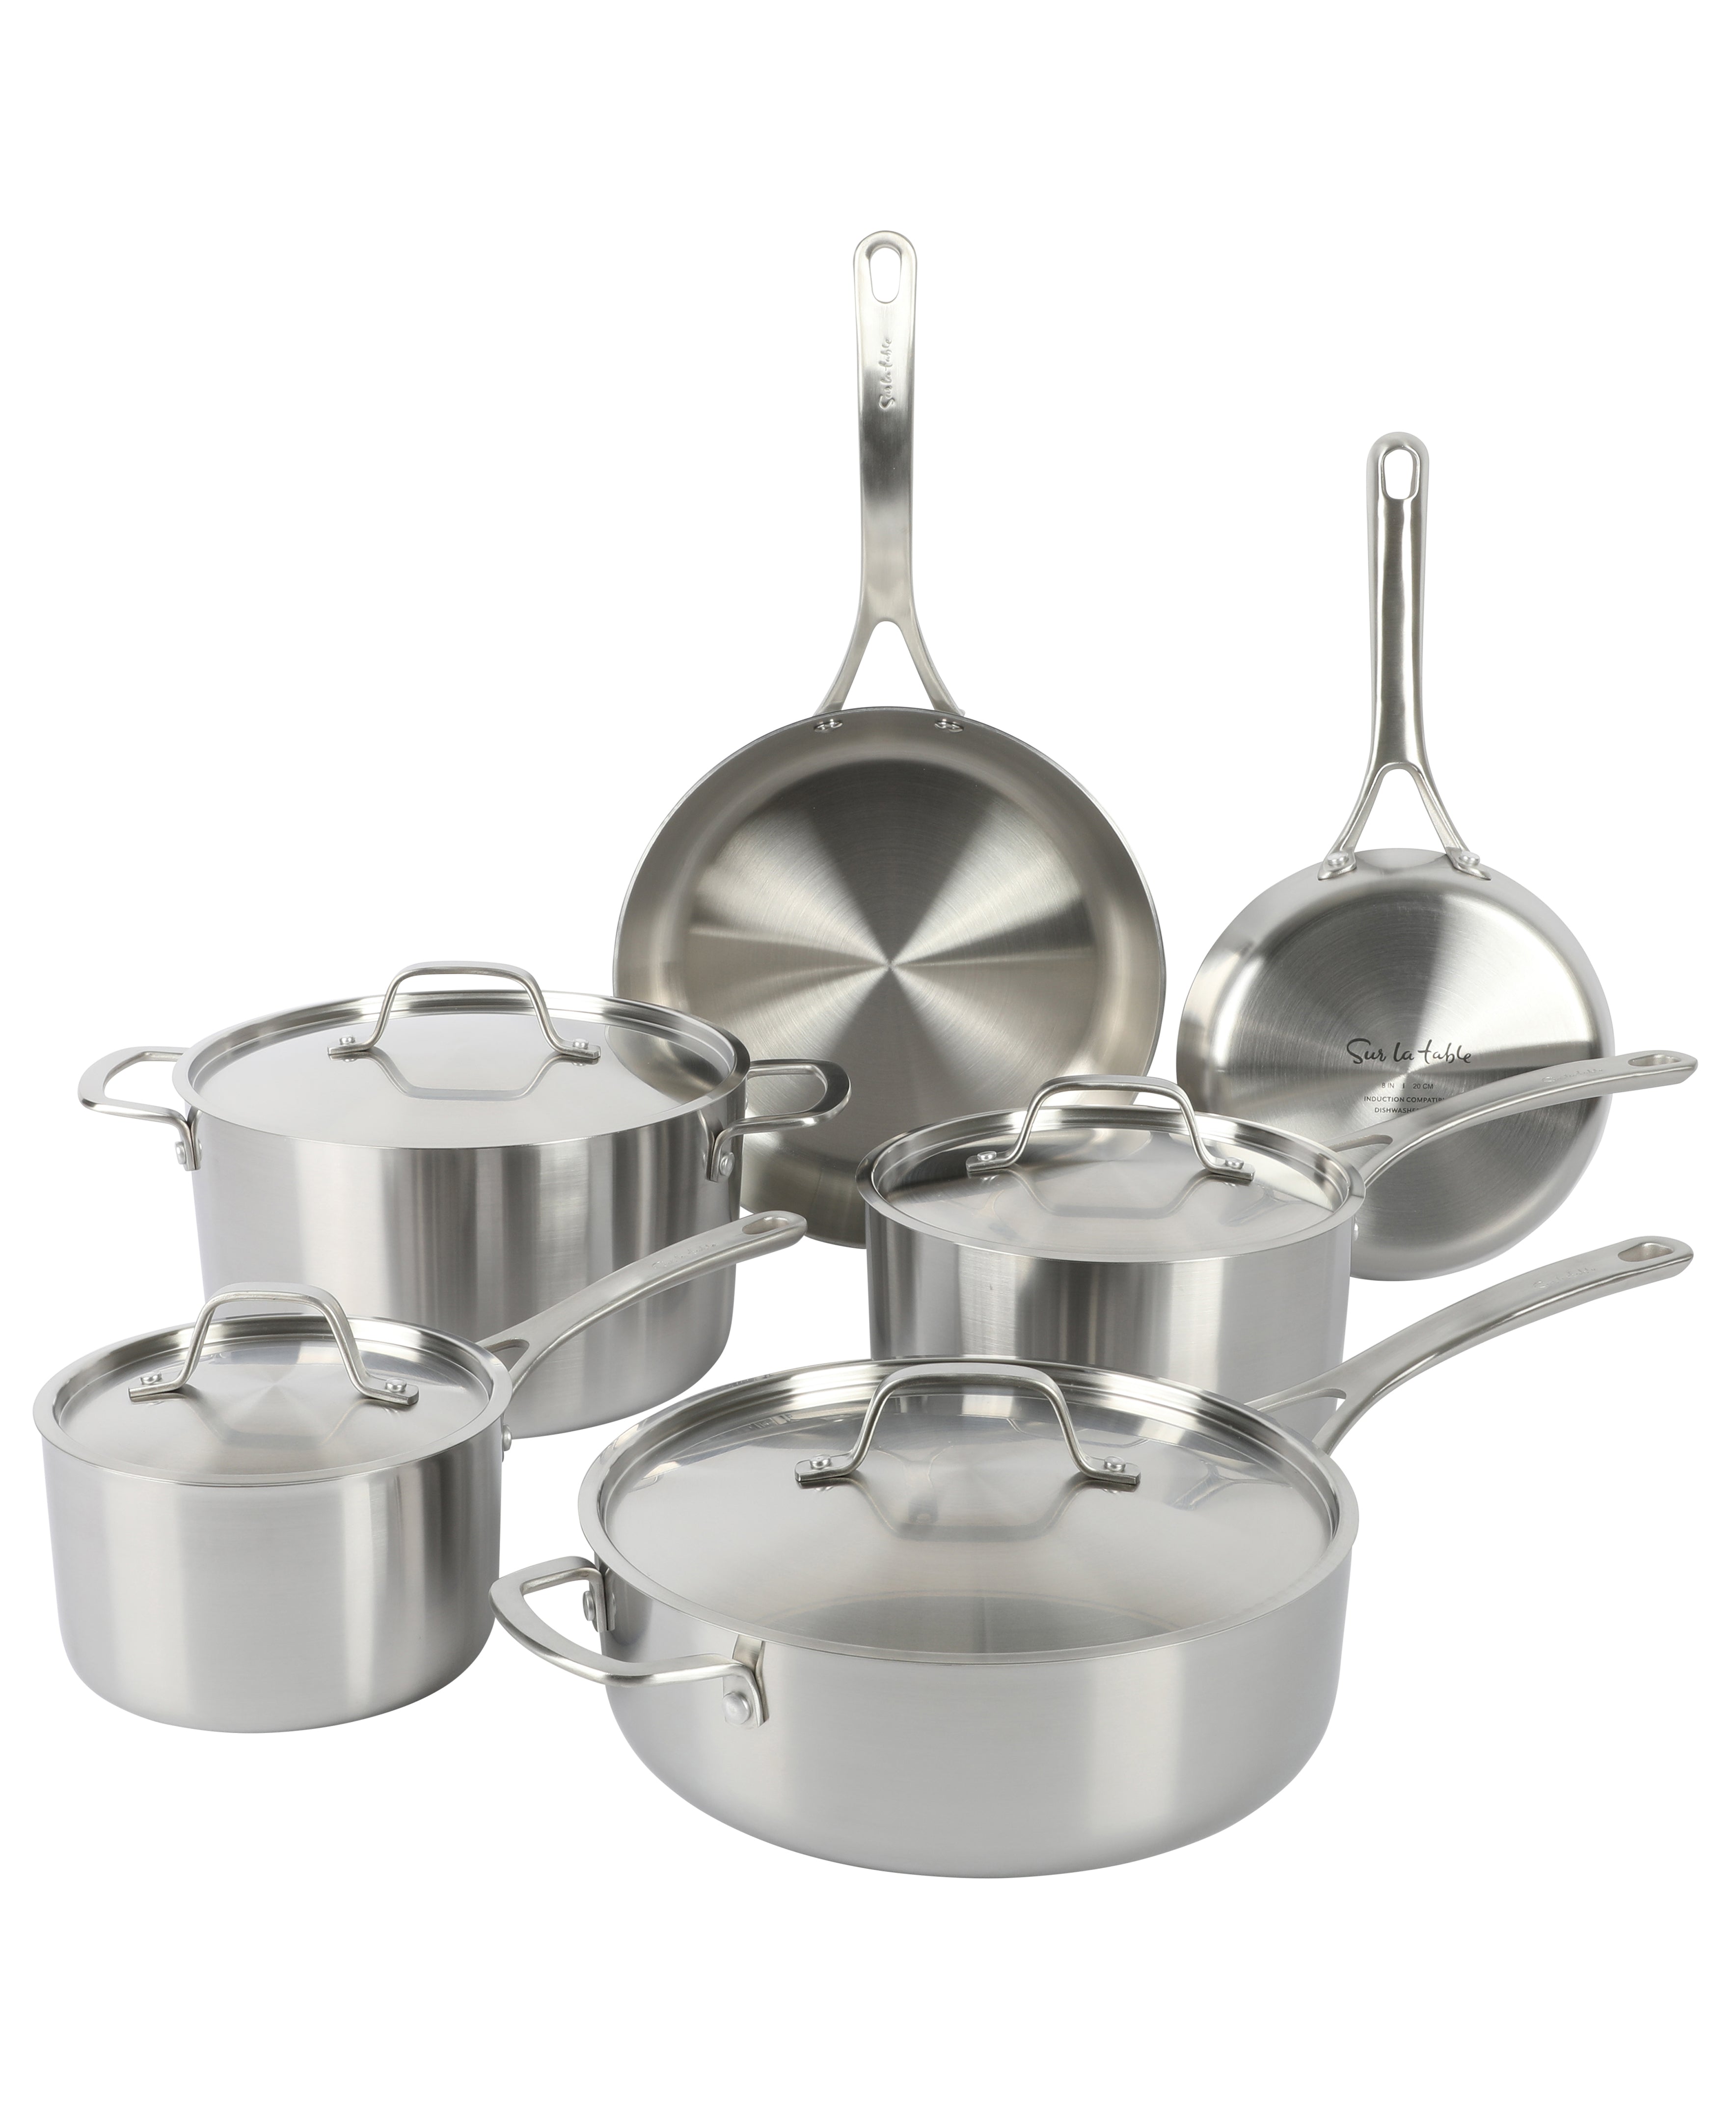 Sur La Table Classic 5-Ply Stainless Steel 14-Piece Cookware Set